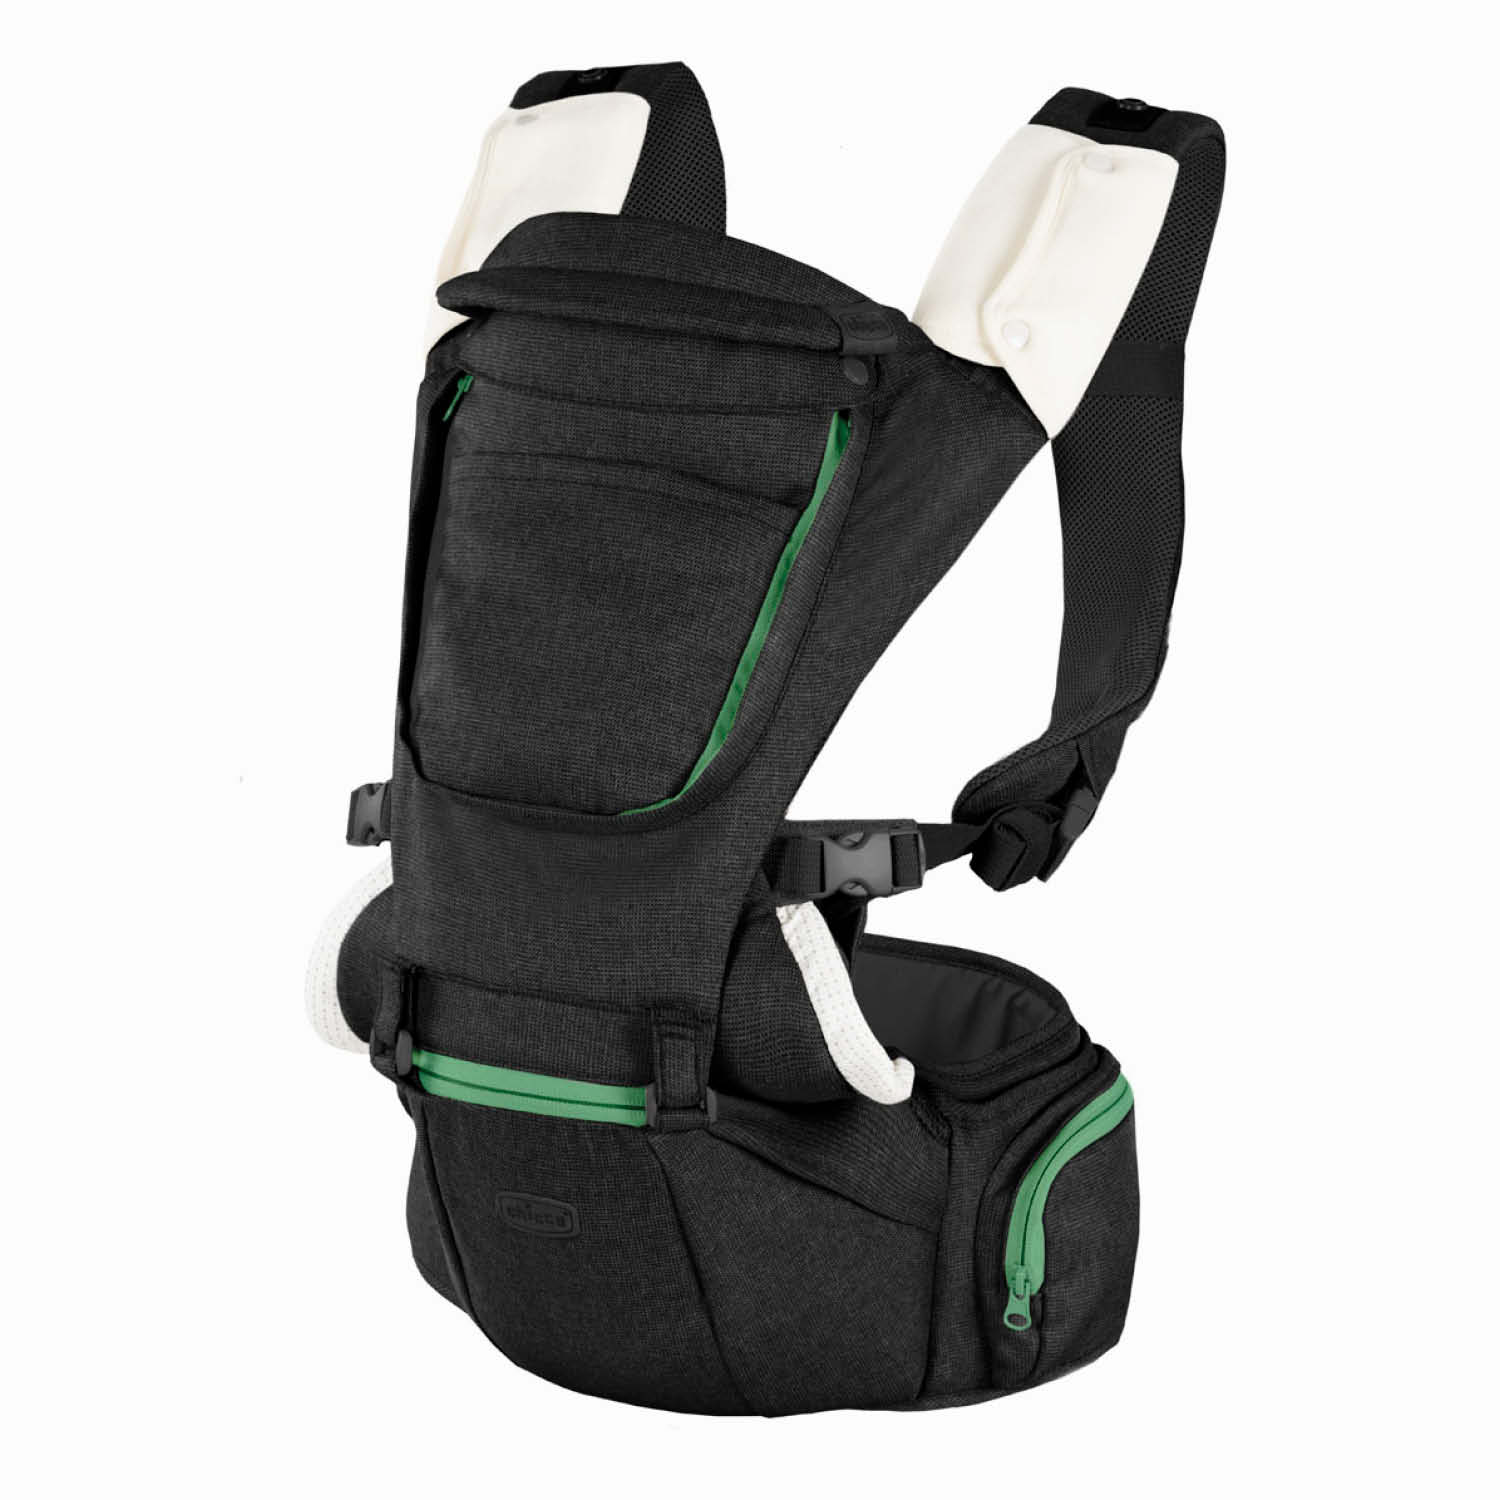 Hip Seat Carrier